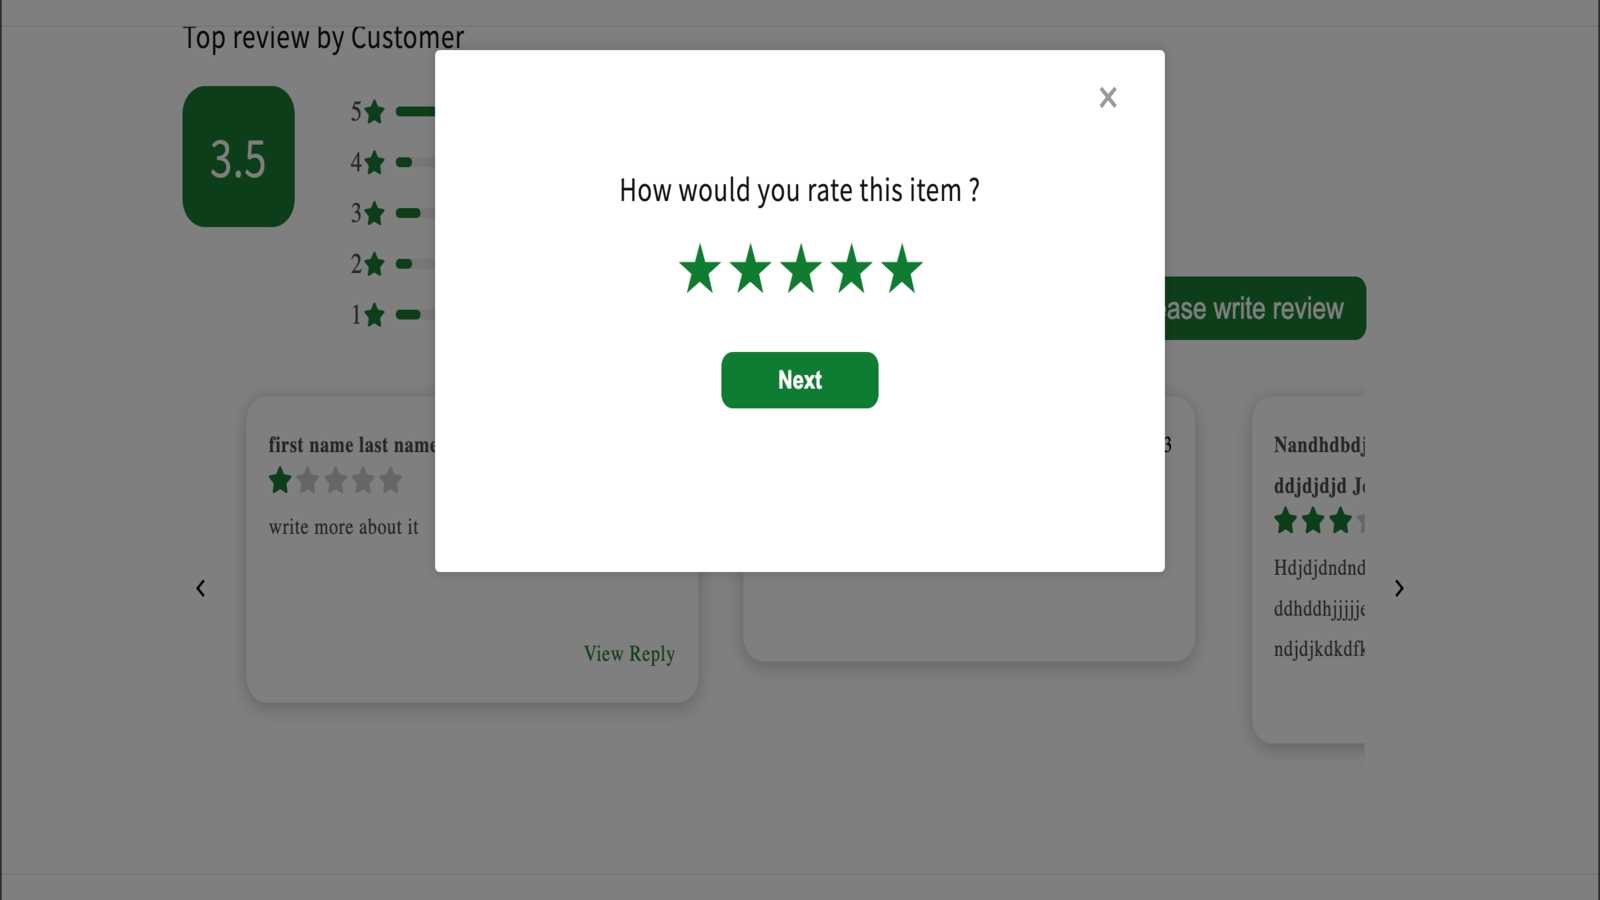 Product review aggregated star ratings